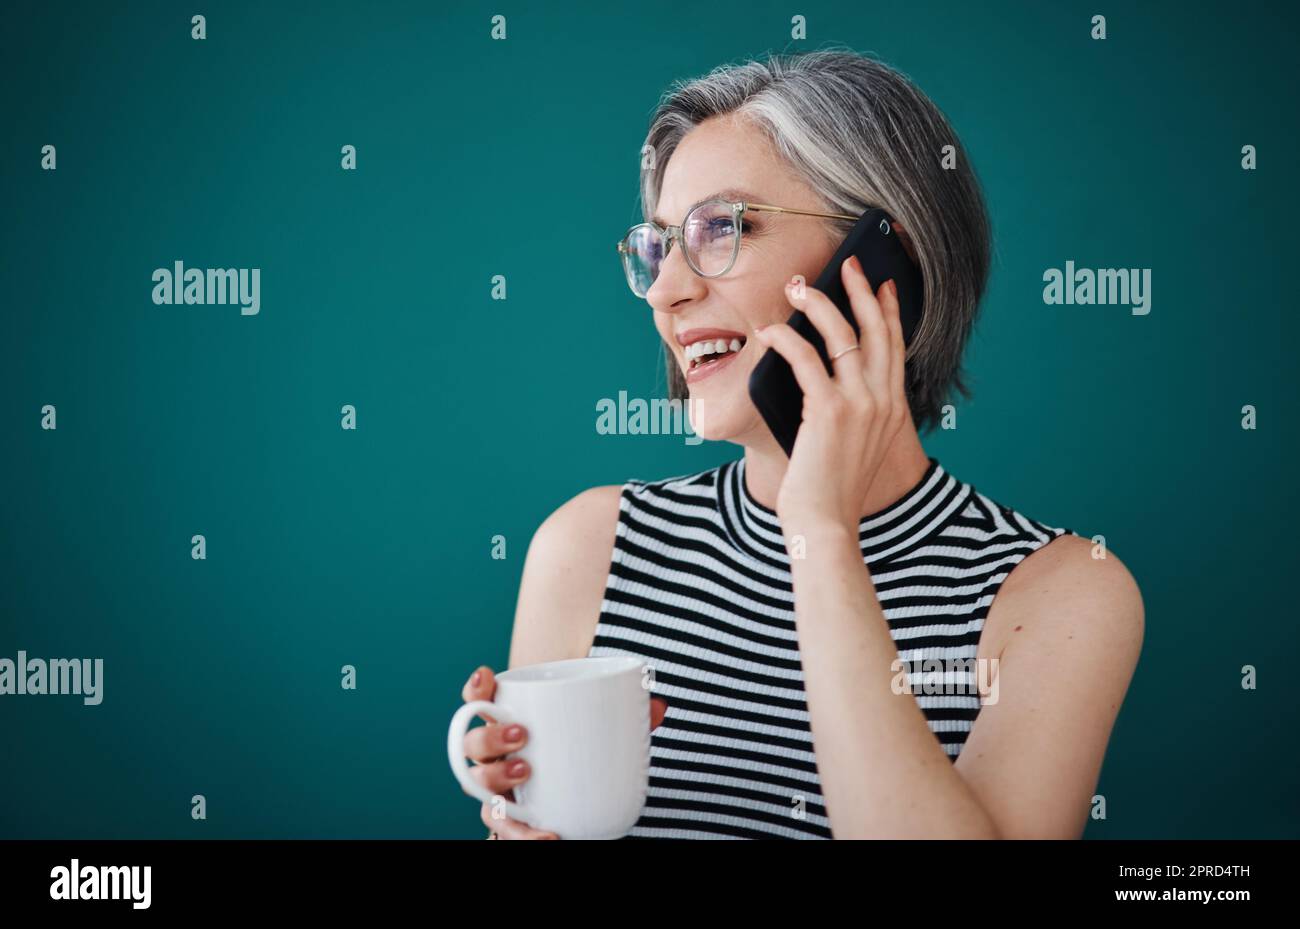 https://c8.alamy.com/comp/2PRD4TH/its-time-well-spent-to-keep-your-clients-happy-a-businesswoman-having-coffee-while-talking-on-her-cellphone-in-her-office-2PRD4TH.jpg